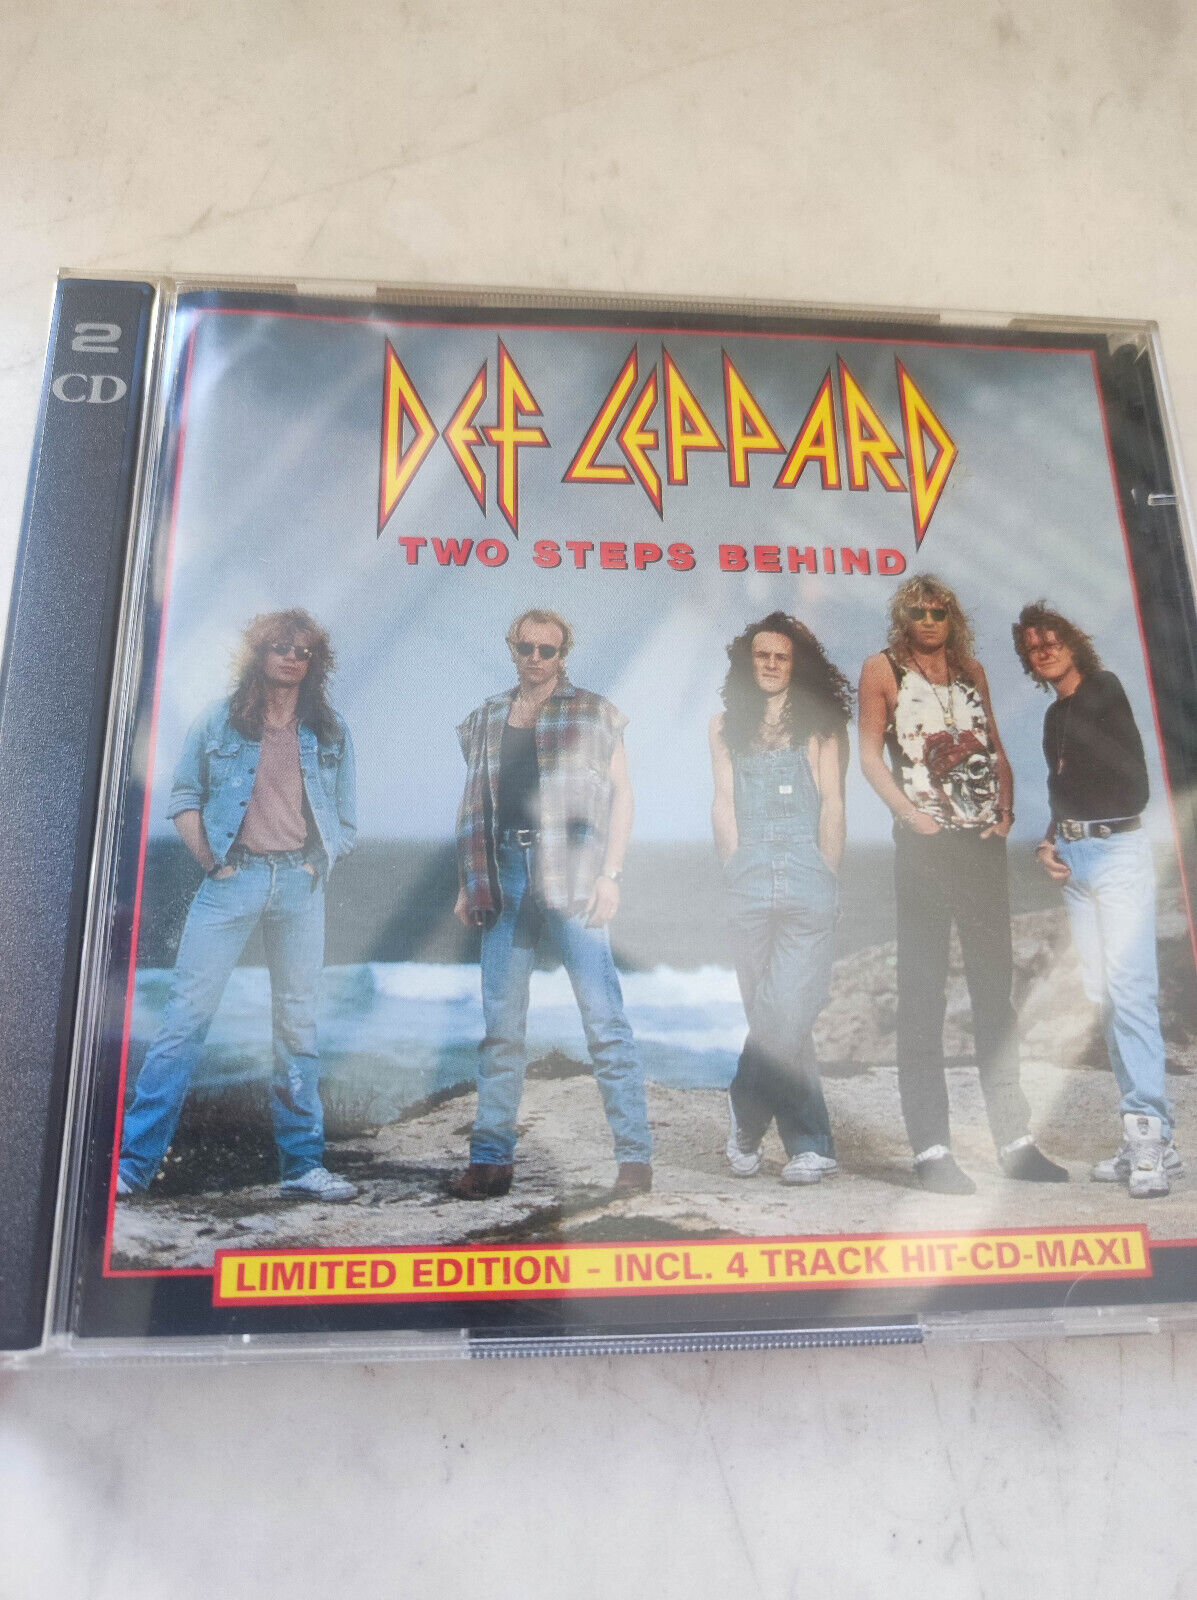 Def Leppard "Two Steps Behind" 2CD single limited  MINT RARE!